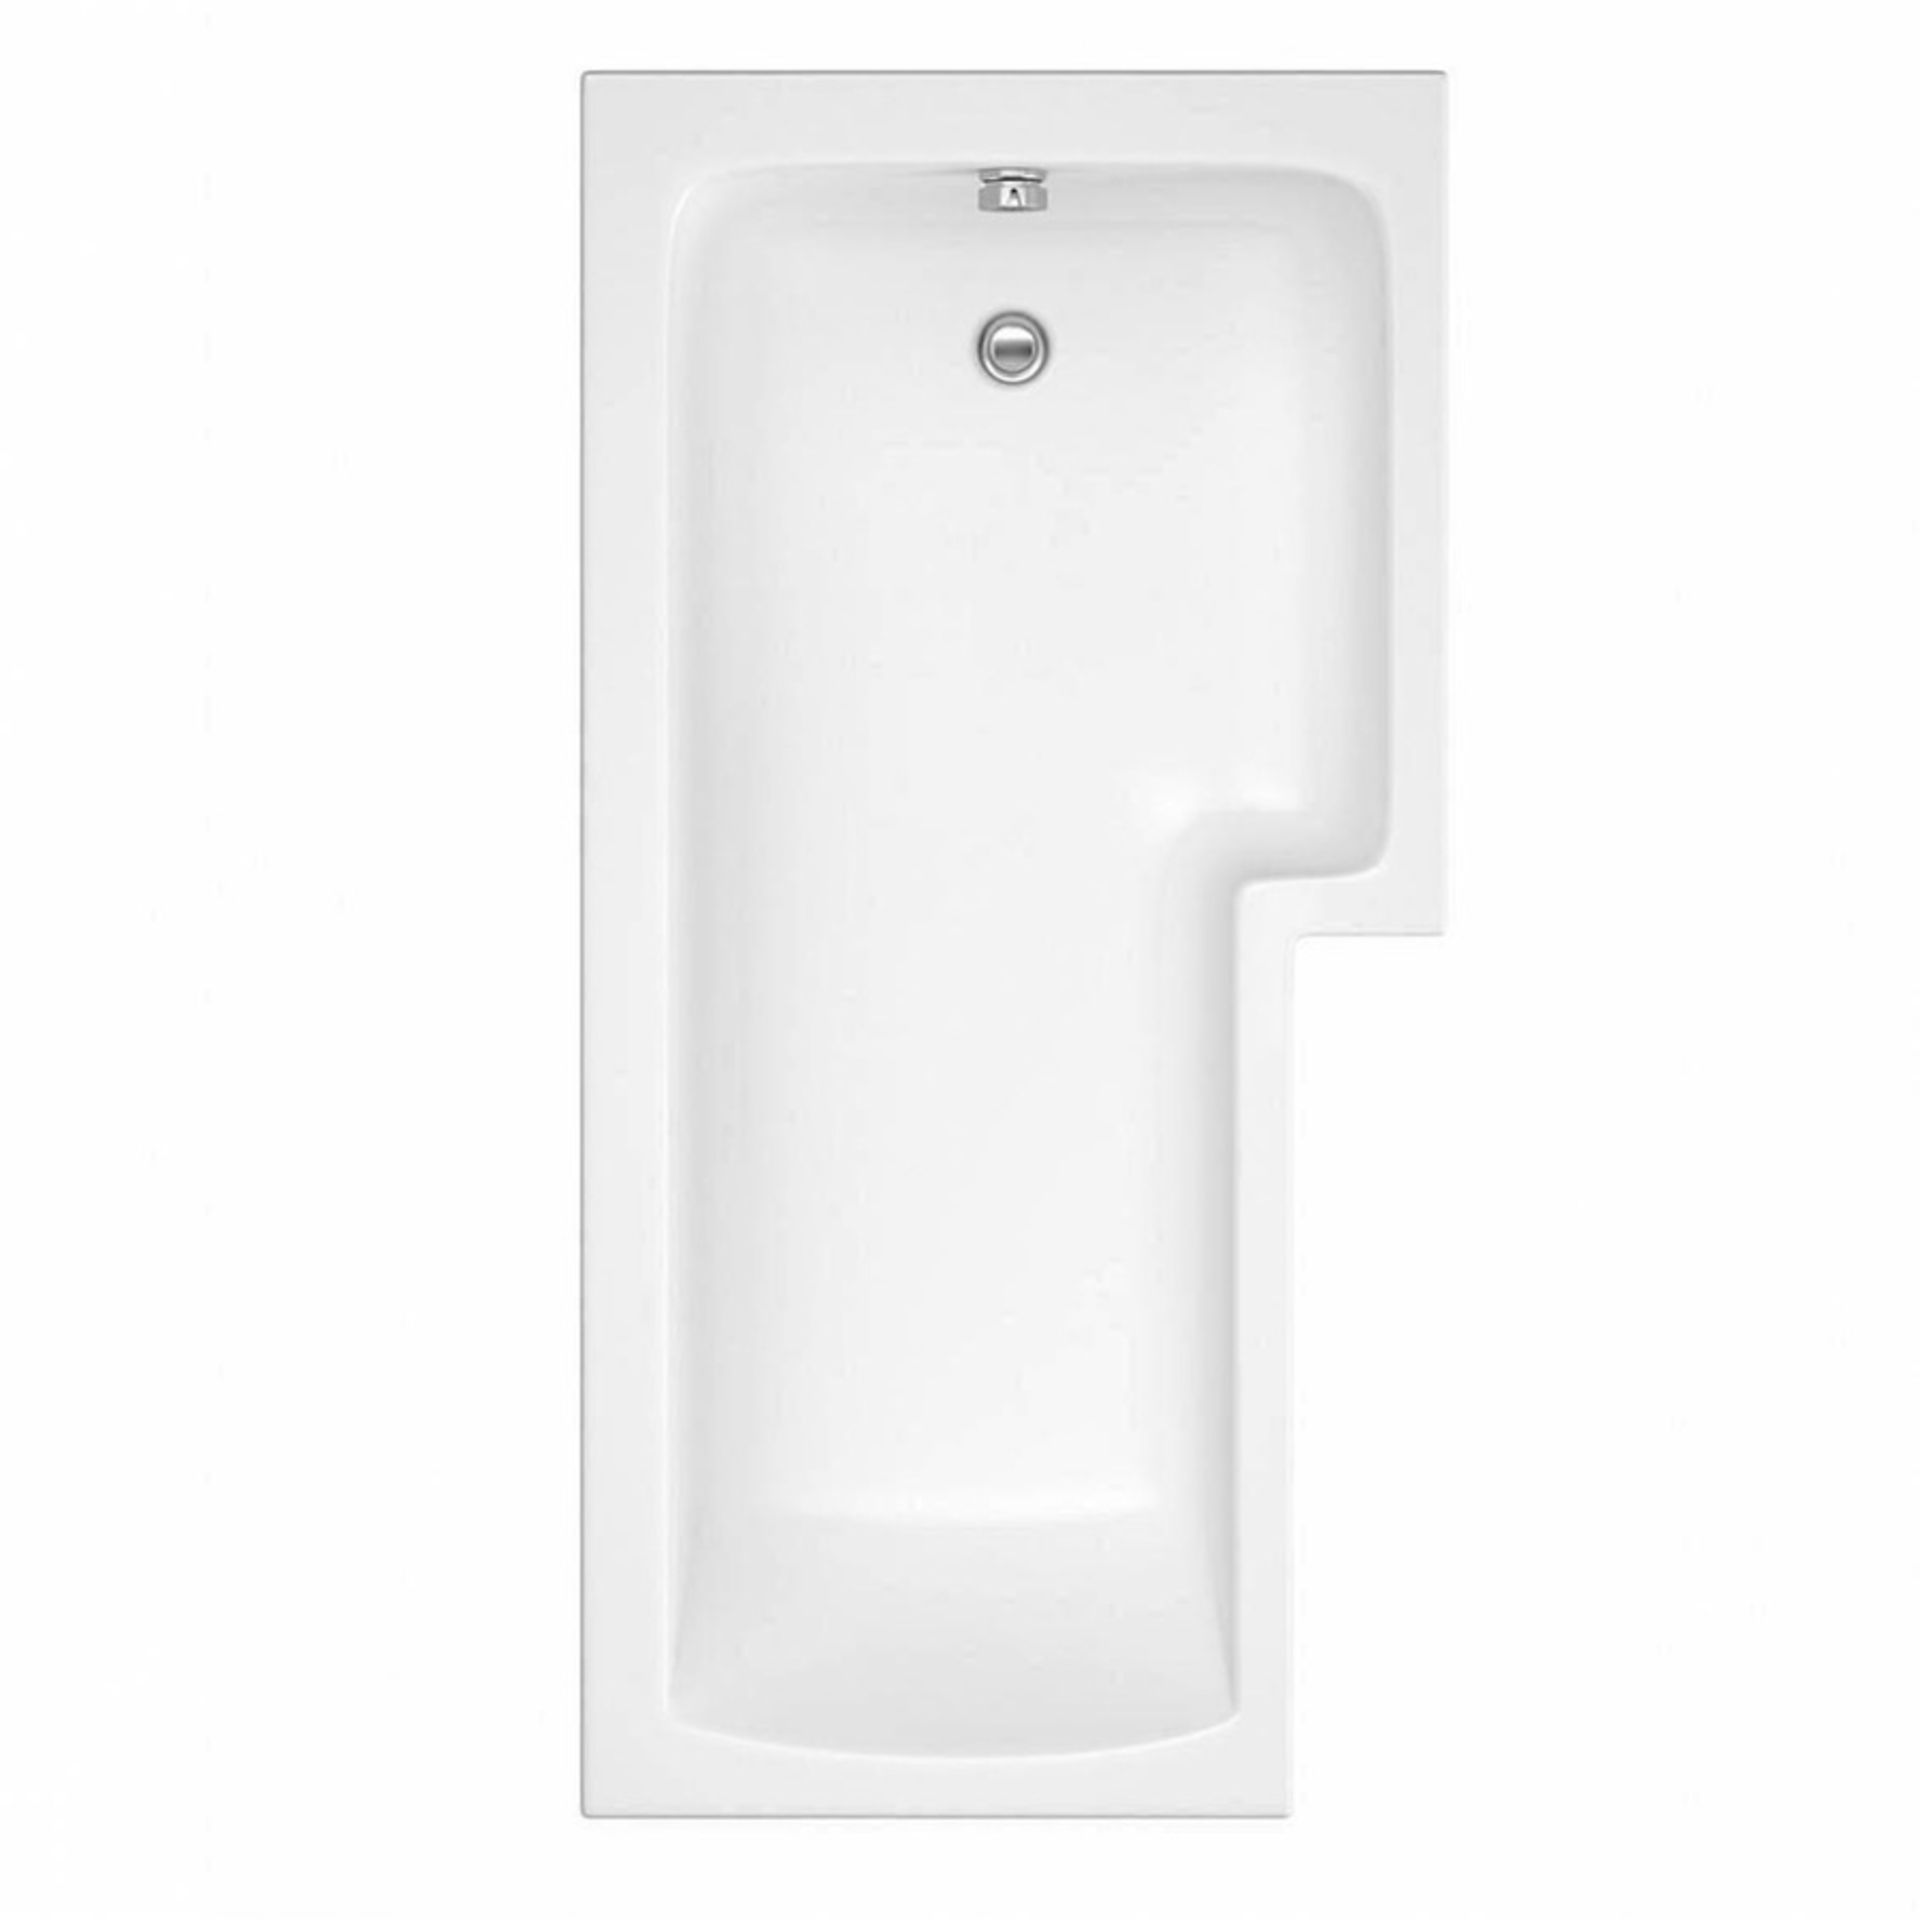 1500 x 850 Boston L shower bath (RH) with dedicated front panel (in factory wrap)